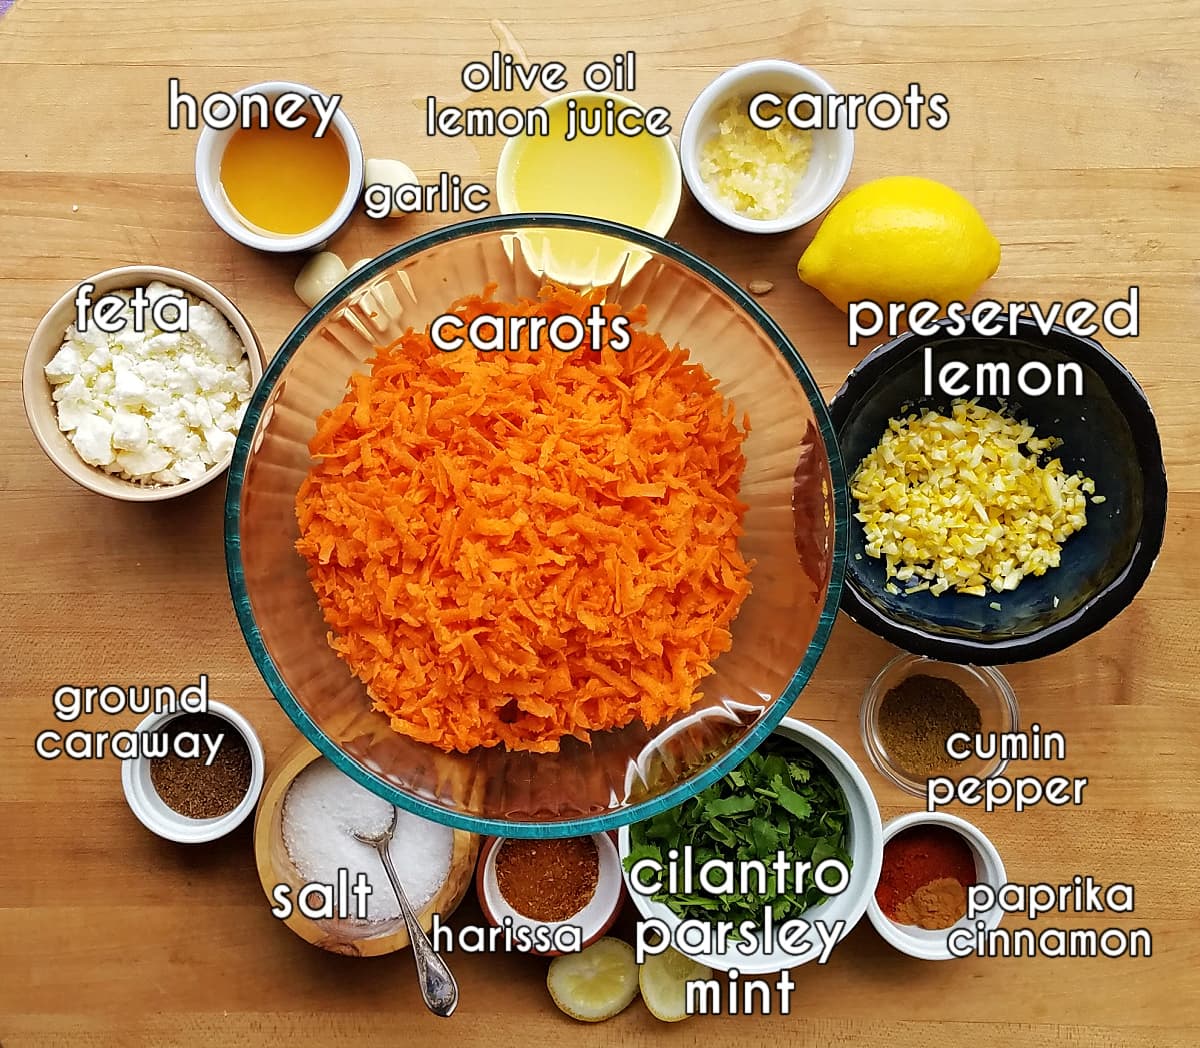 Moroccan carrot salad ingredients, labeled.